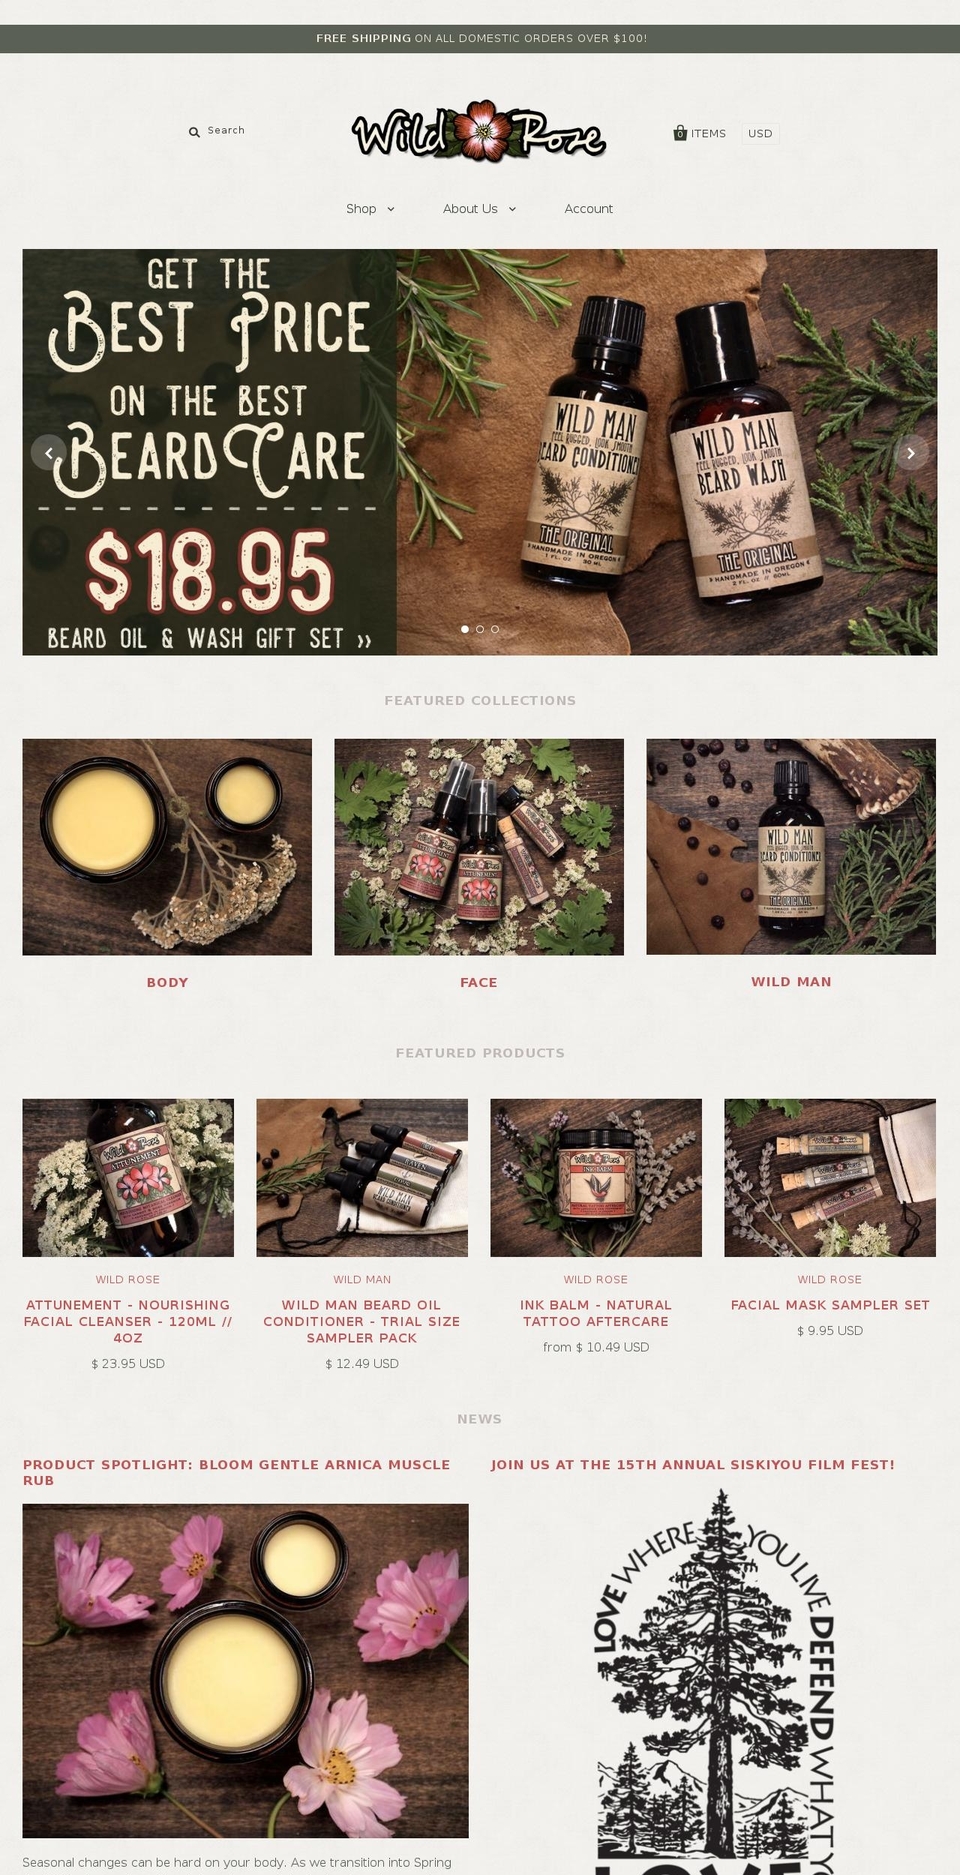 Pacific Shopify theme site example wildroseherbs.com